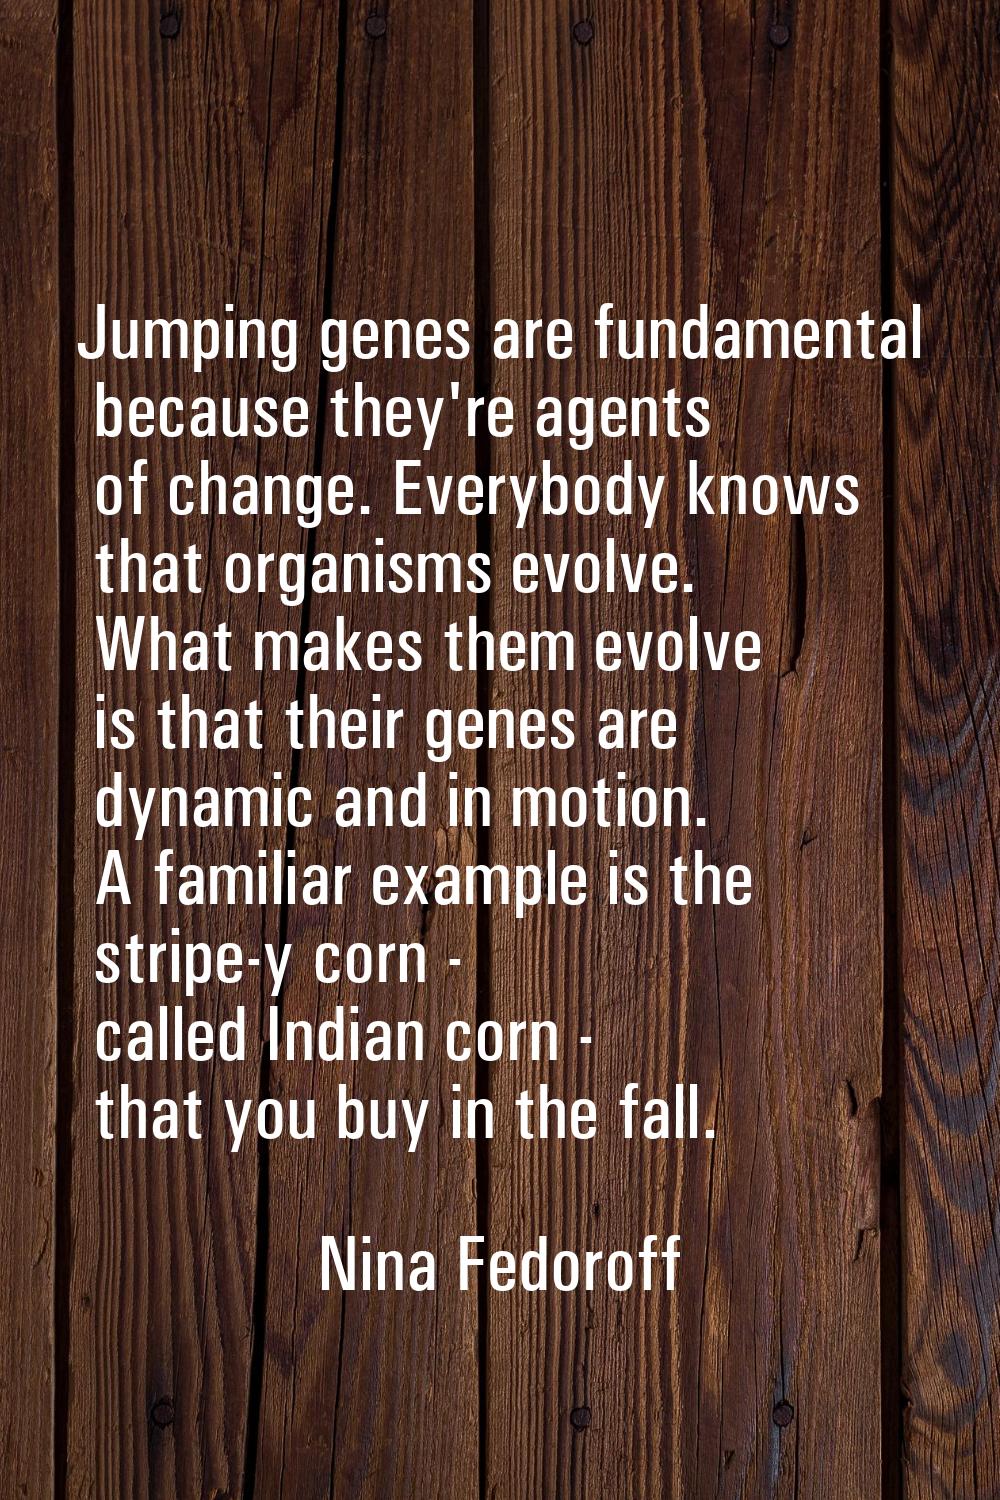 Jumping genes are fundamental because they're agents of change. Everybody knows that organisms evol